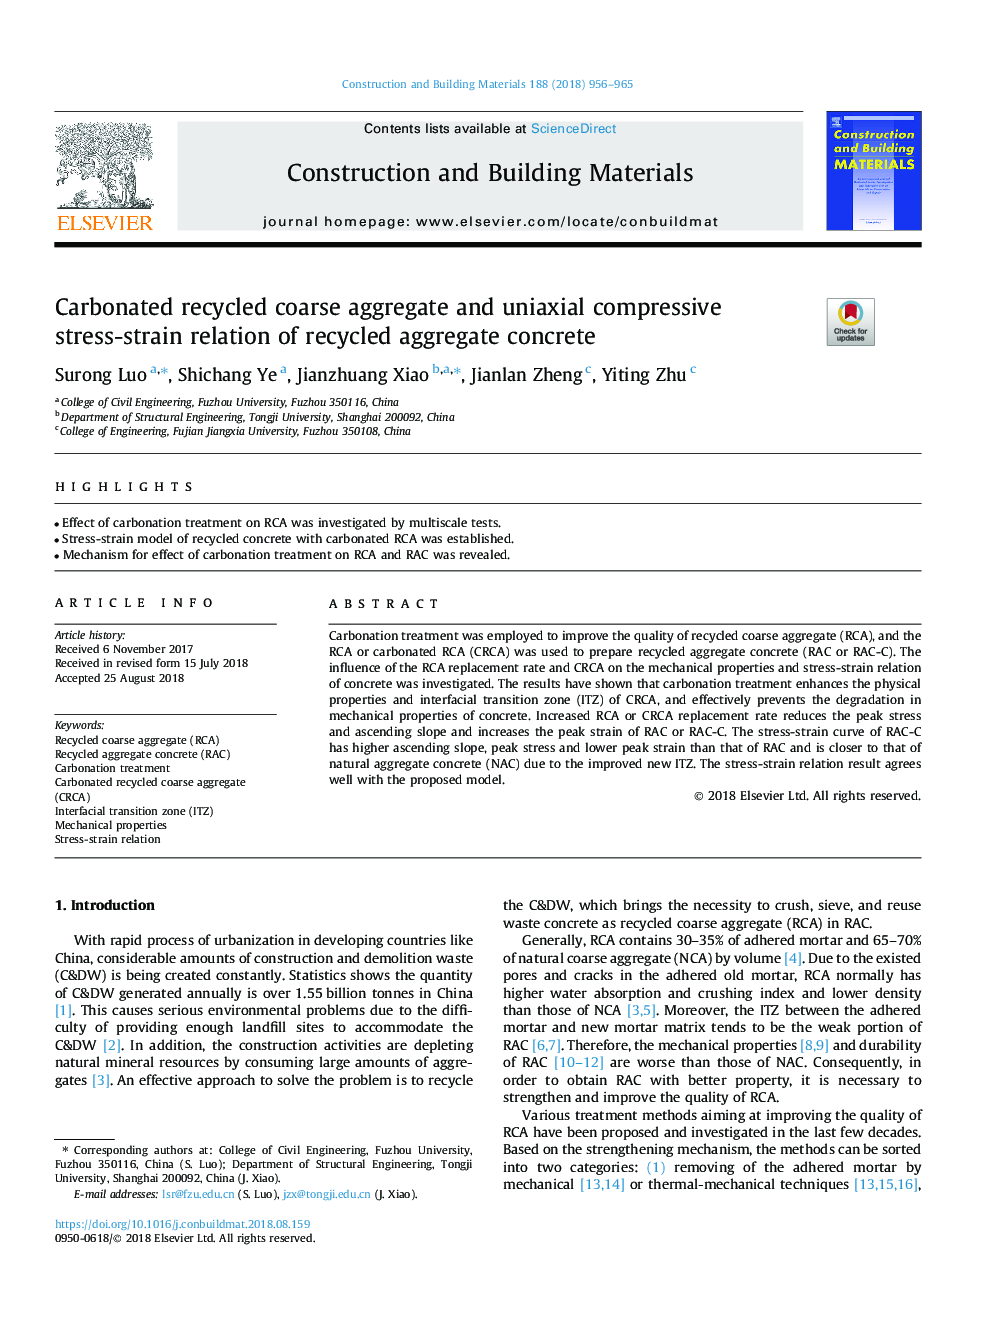 Carbonated recycled coarse aggregate and uniaxial compressive stress-strain relation of recycled aggregate concrete